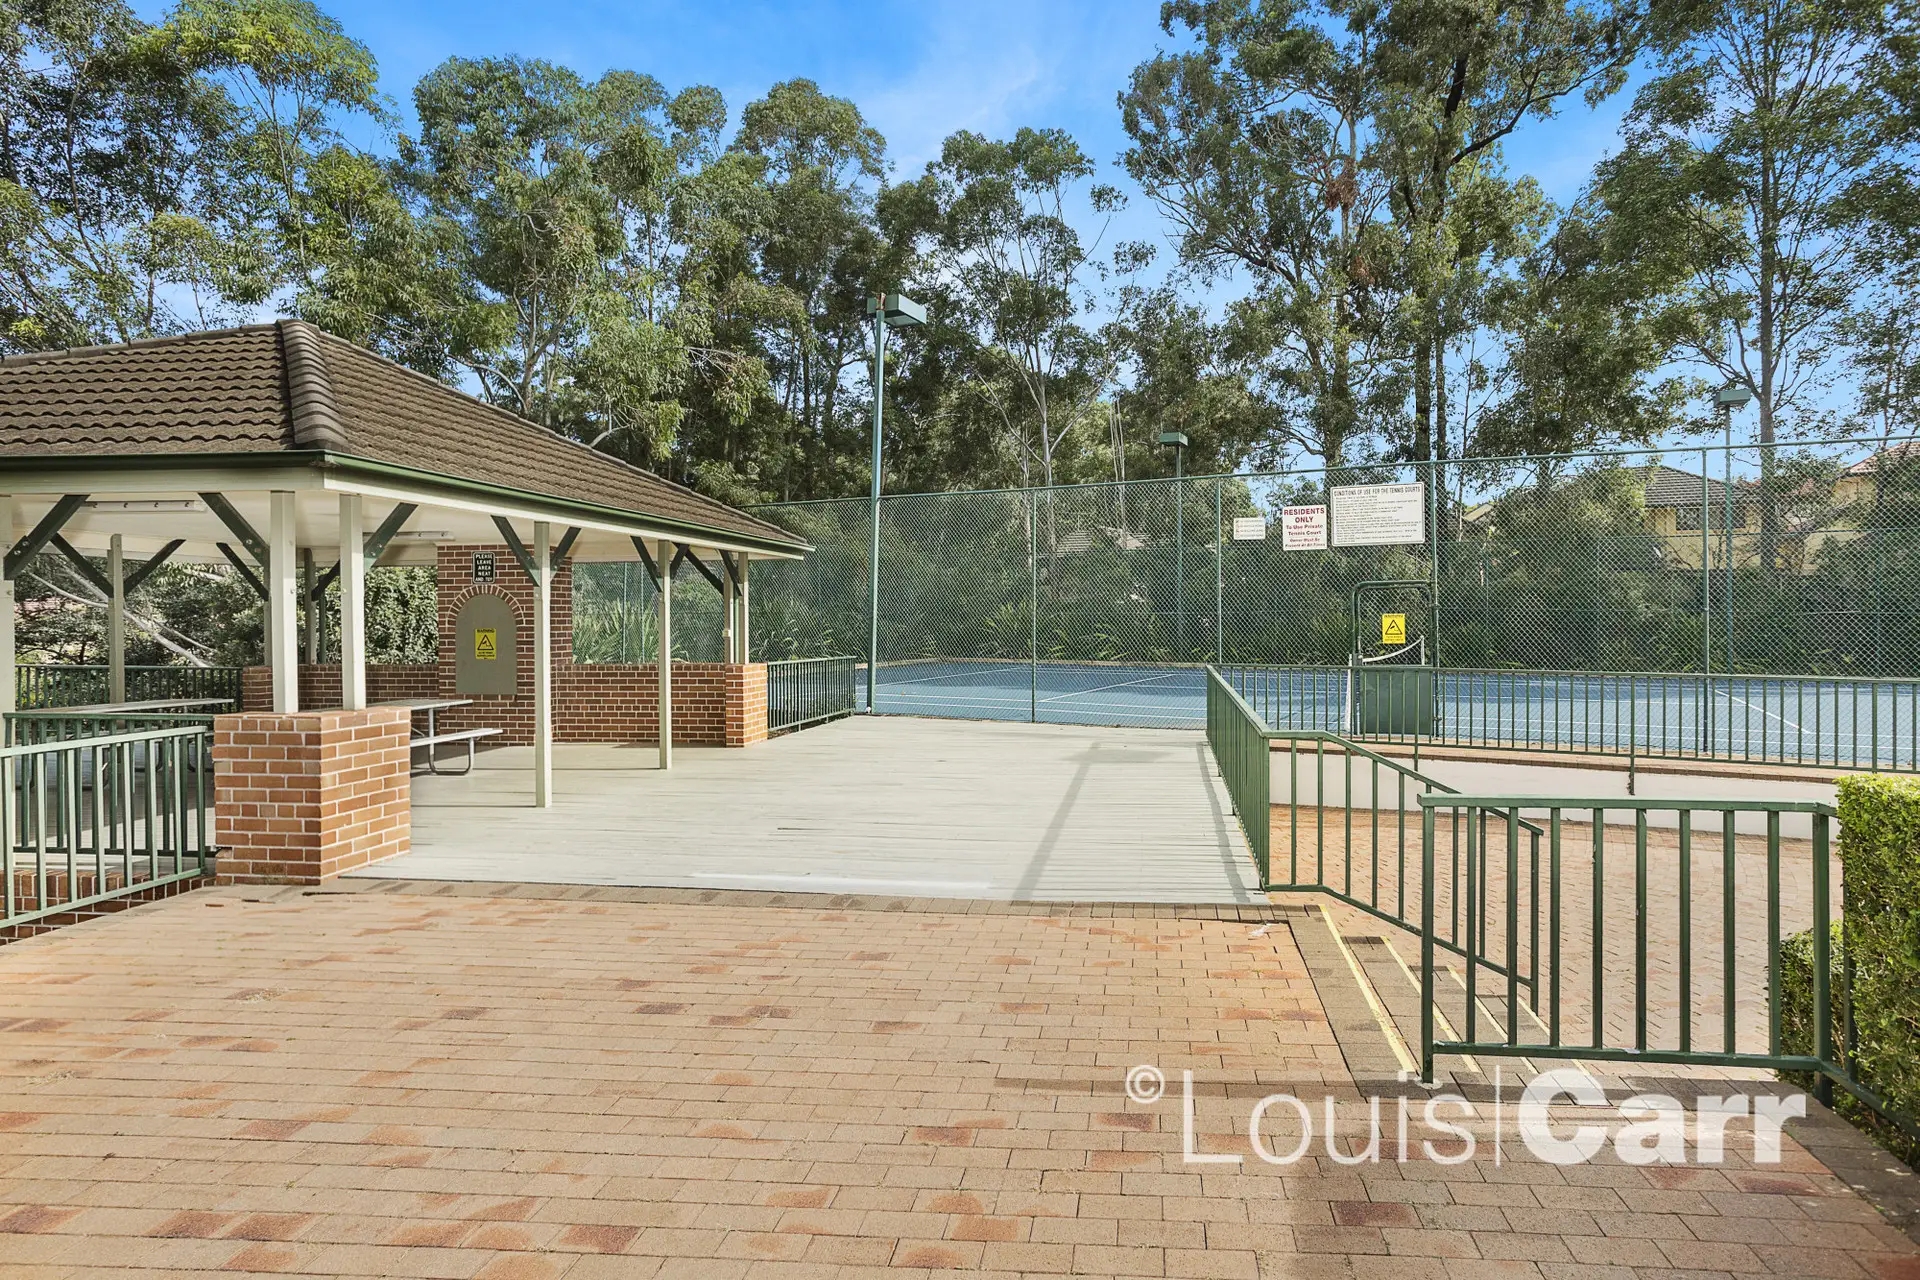 Photo #9: 32 The Glade, West Pennant Hills - Sold by Louis Carr Real Estate